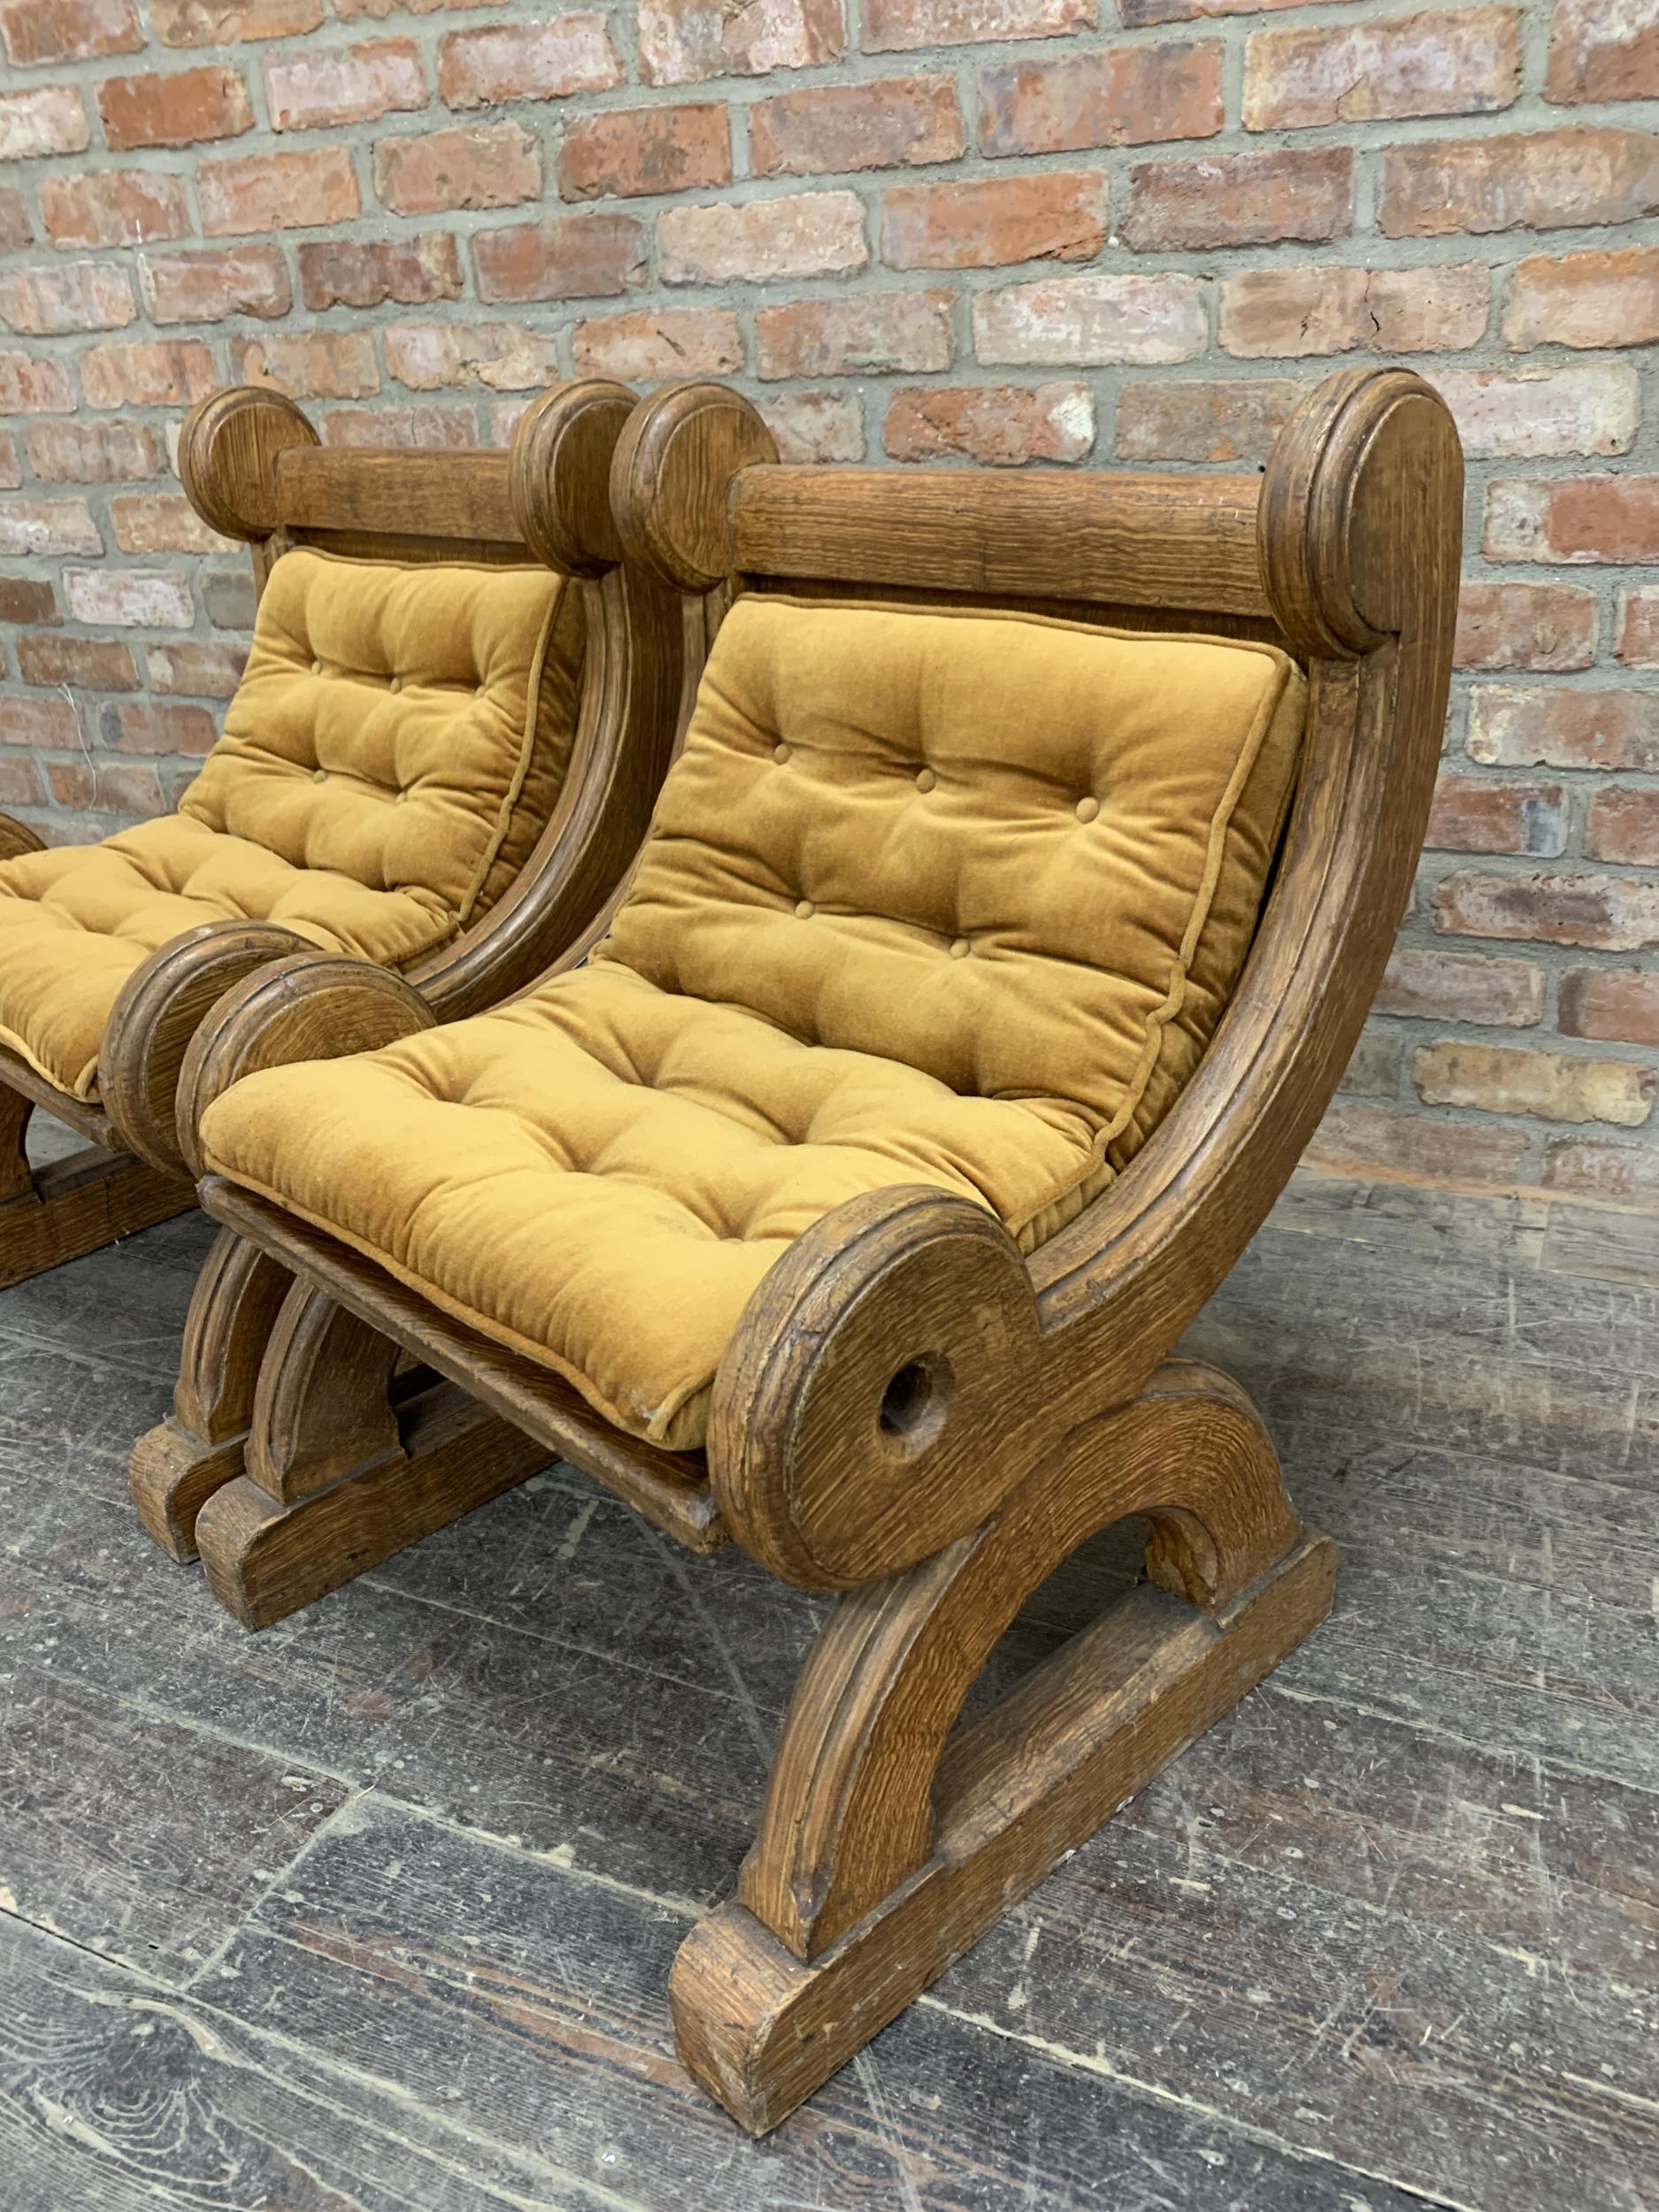 Pair of 19th century Ecclesiastical chairs with button back dralon upholstered cushions, H 84cm x - Image 2 of 4